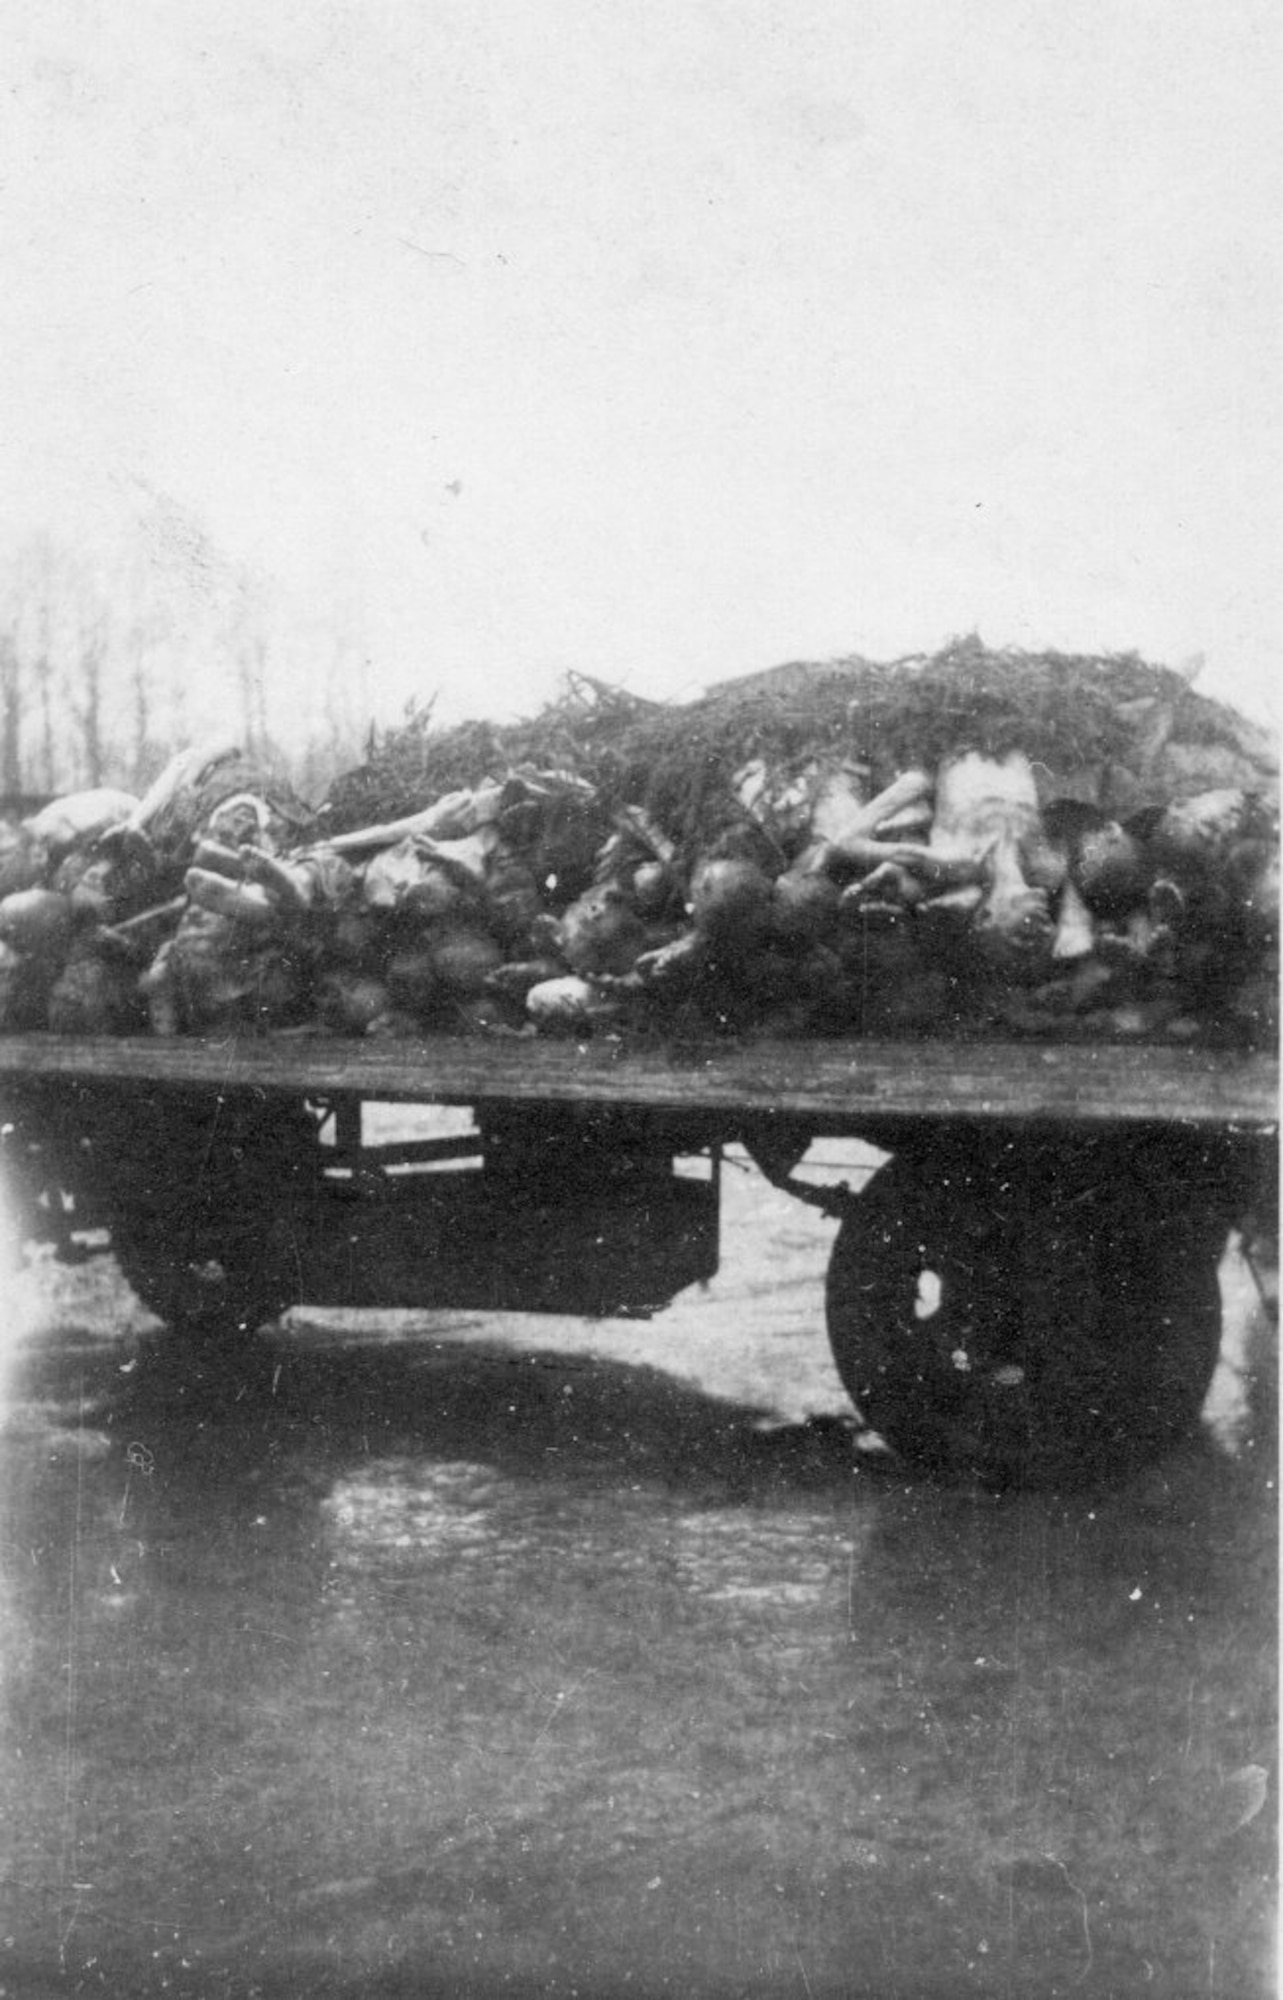 Bodies were stacked like cordwood on this cart of concentration camp victims in Germany, 1945 (Courtesy Ms. Nancy Beaumier, daughter of 371FG veteran Sgt. Tom Boliaris)